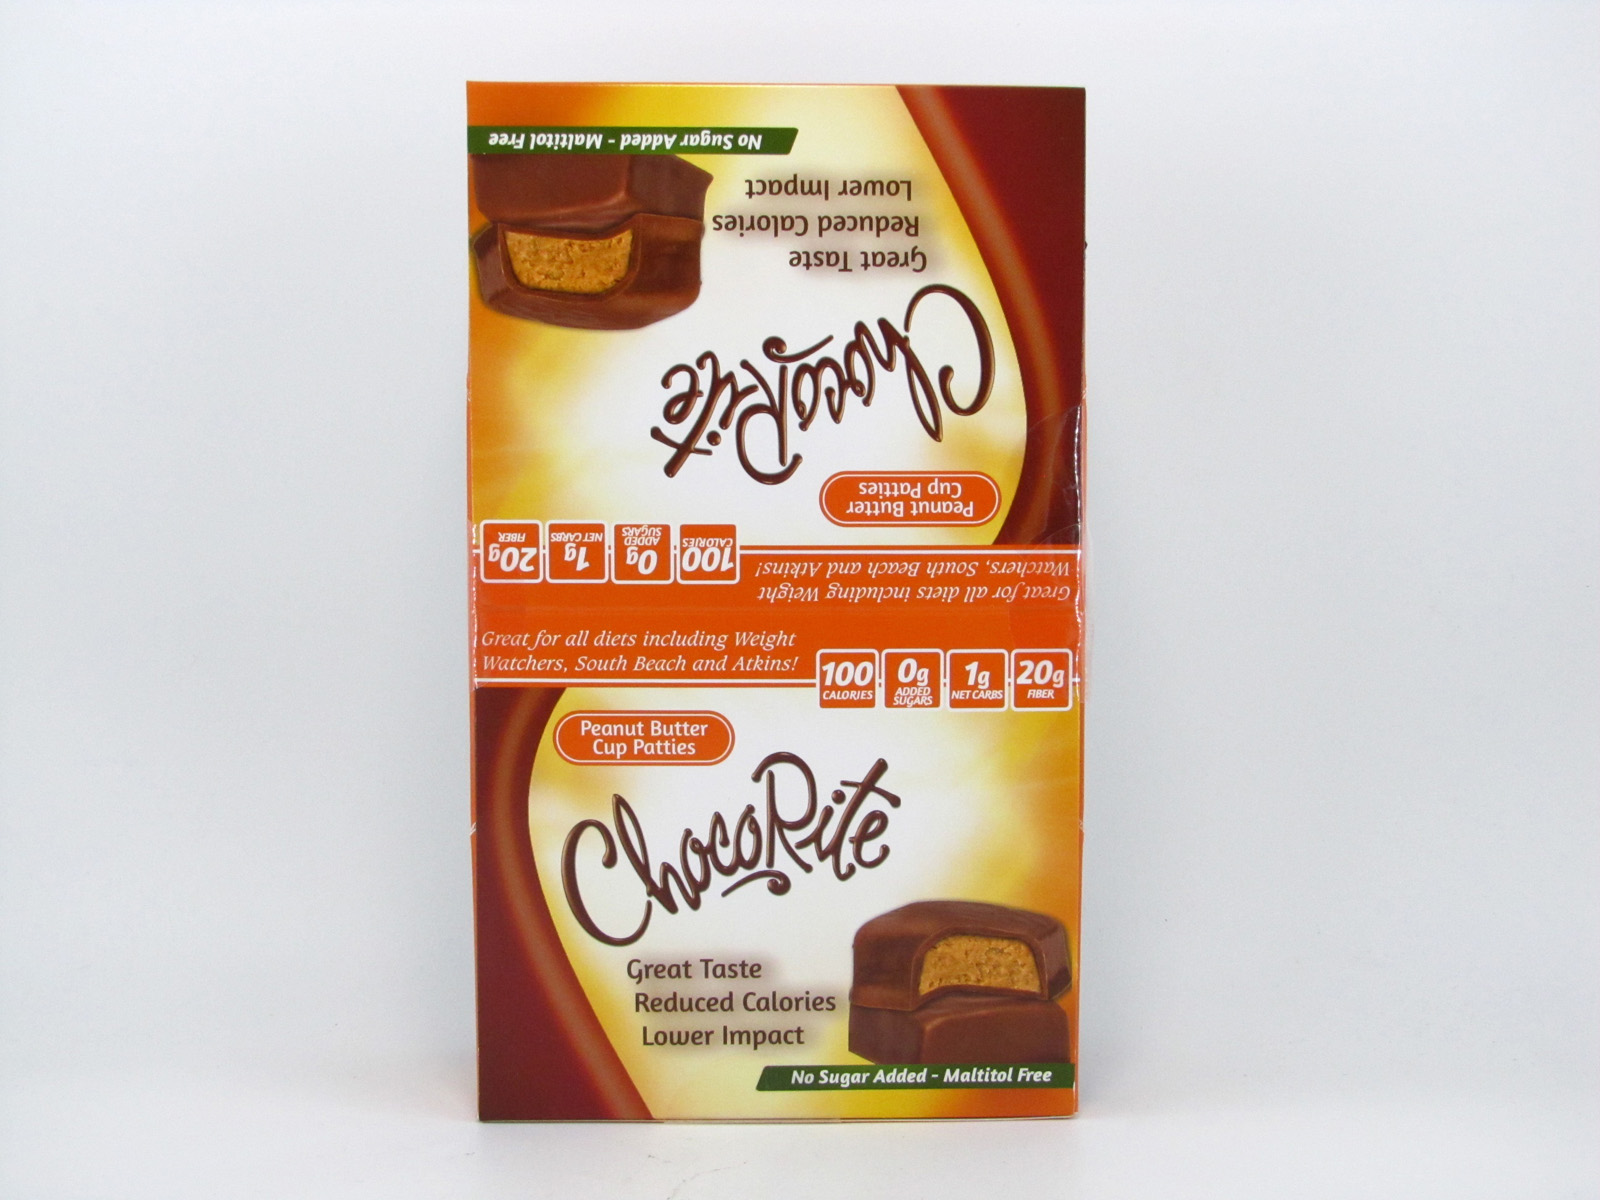 Chocorite Bar (36g) - Peanut Butter Cup Patties Box of 16 - front view